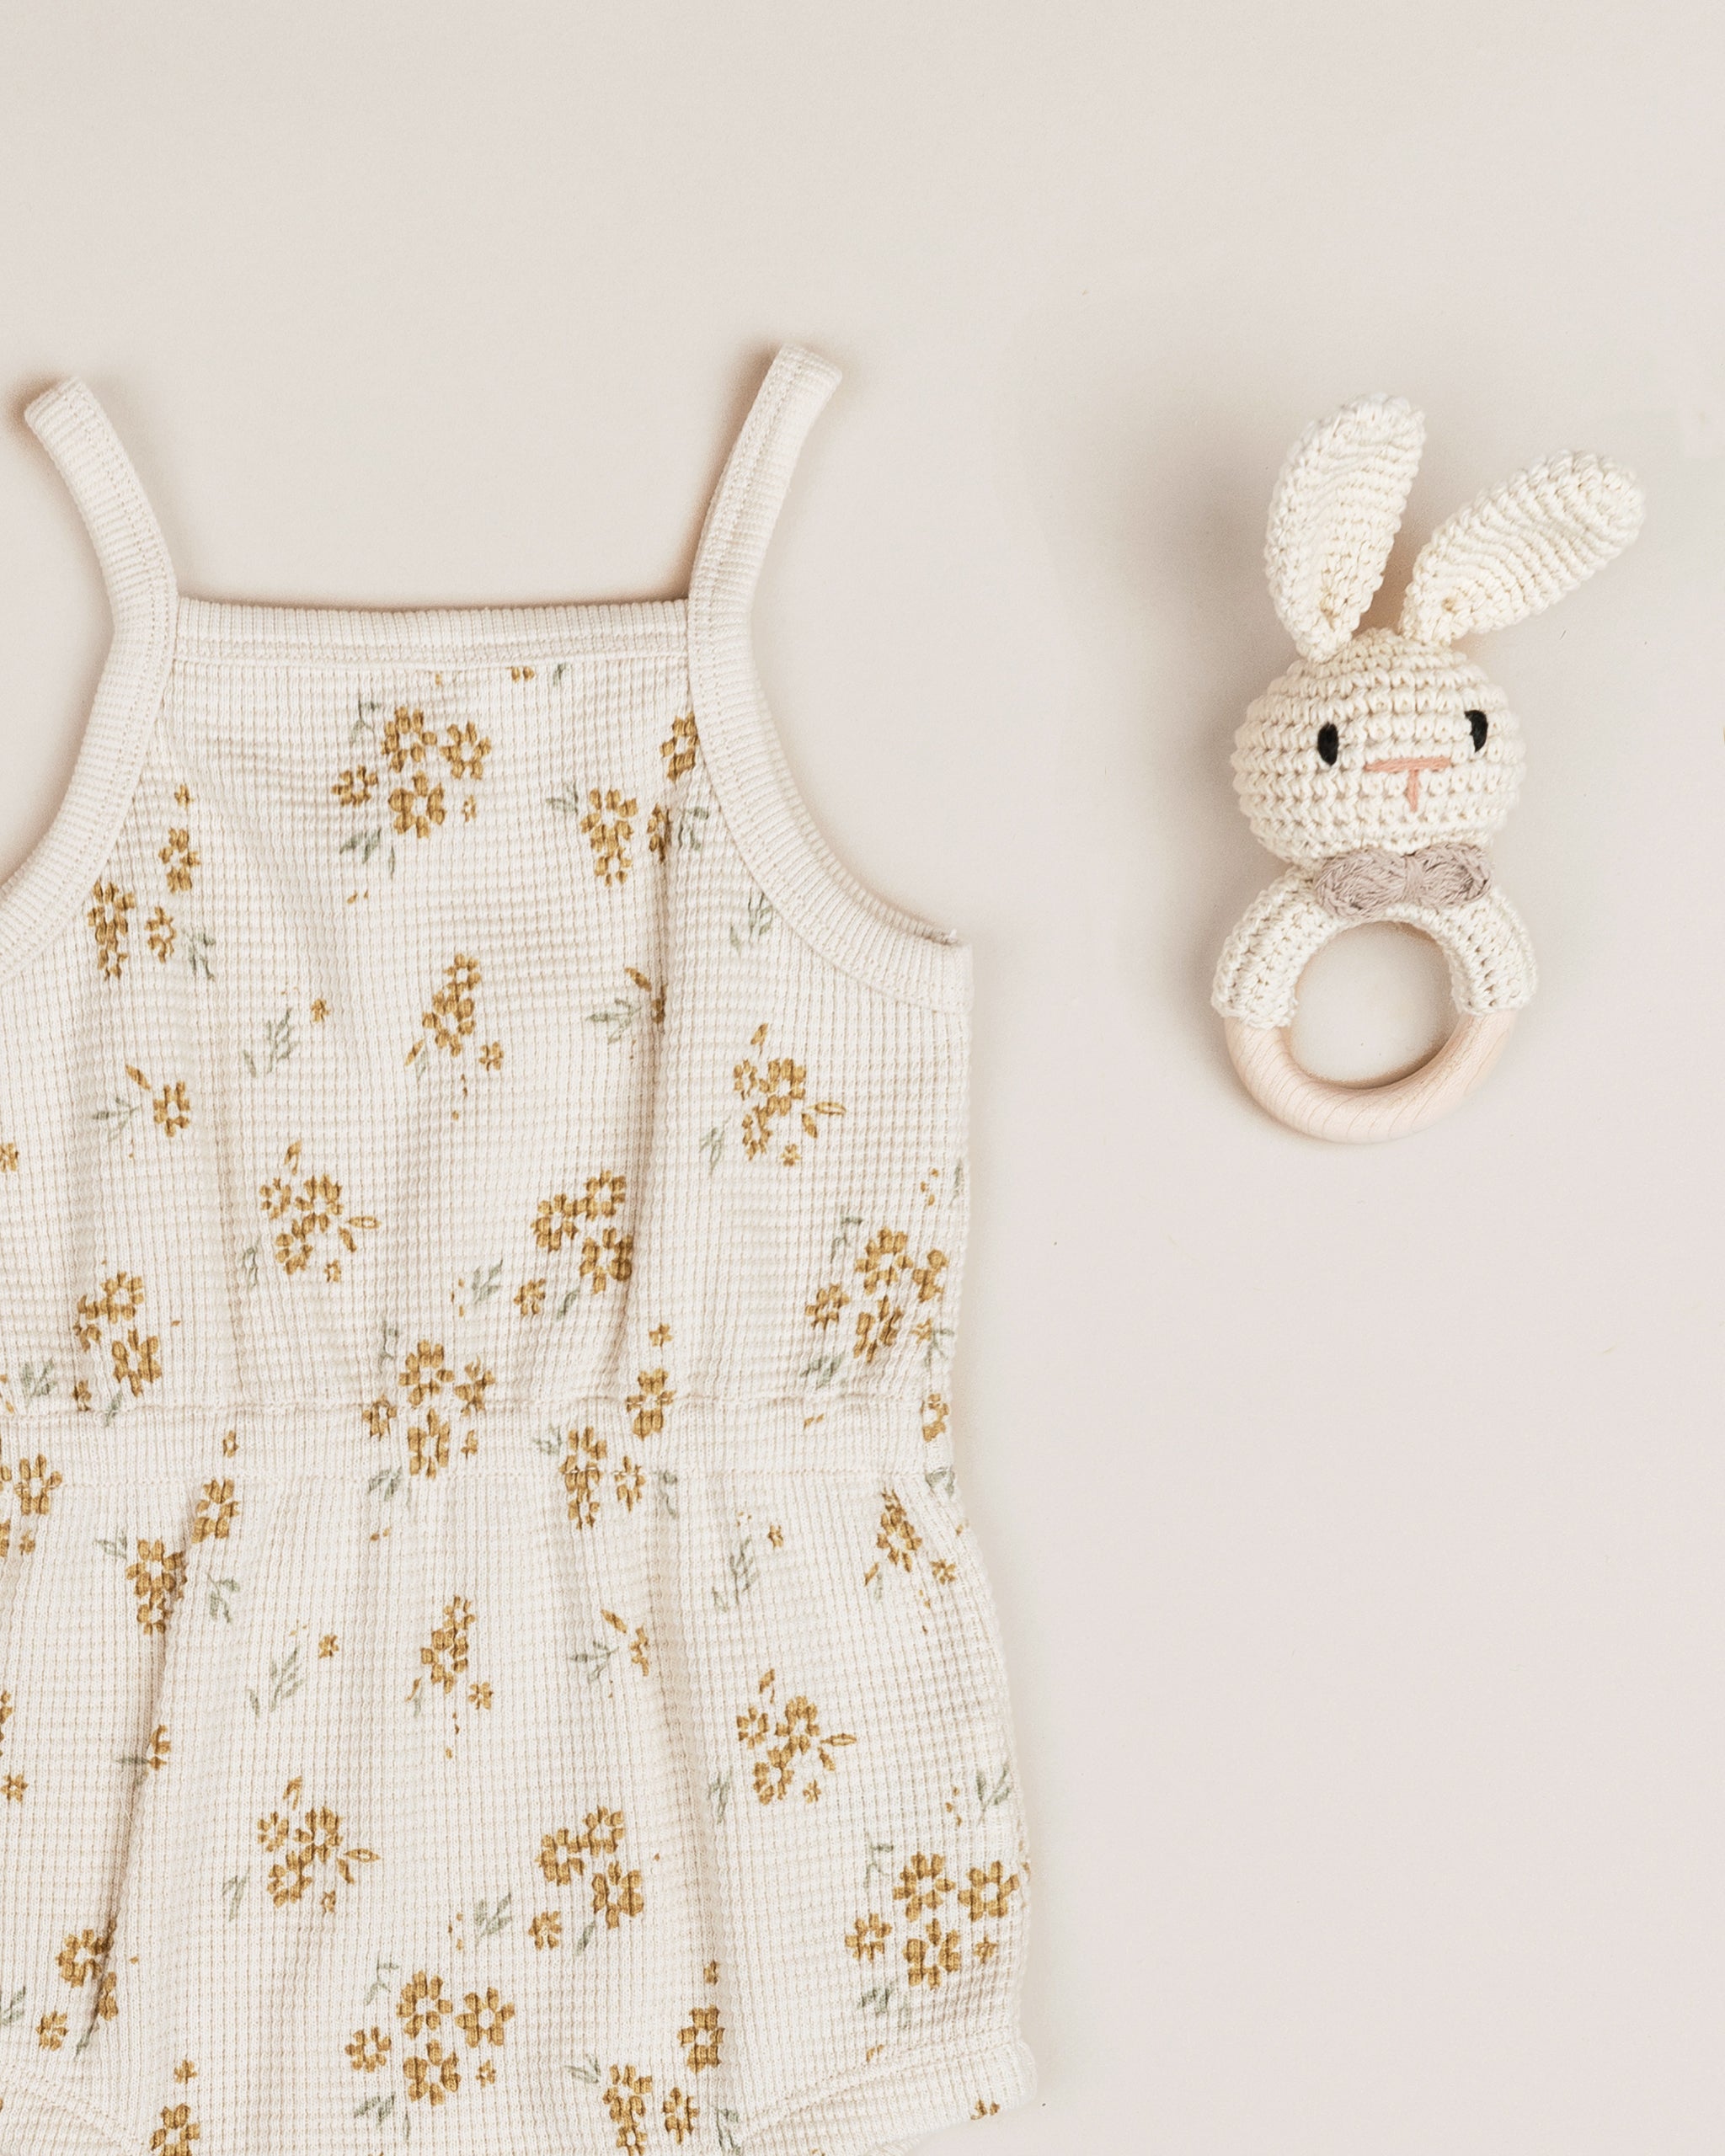 Waffle Cinch Romper || Honey Flower - Rylee + Cru | Kids Clothes | Trendy Baby Clothes | Modern Infant Outfits |